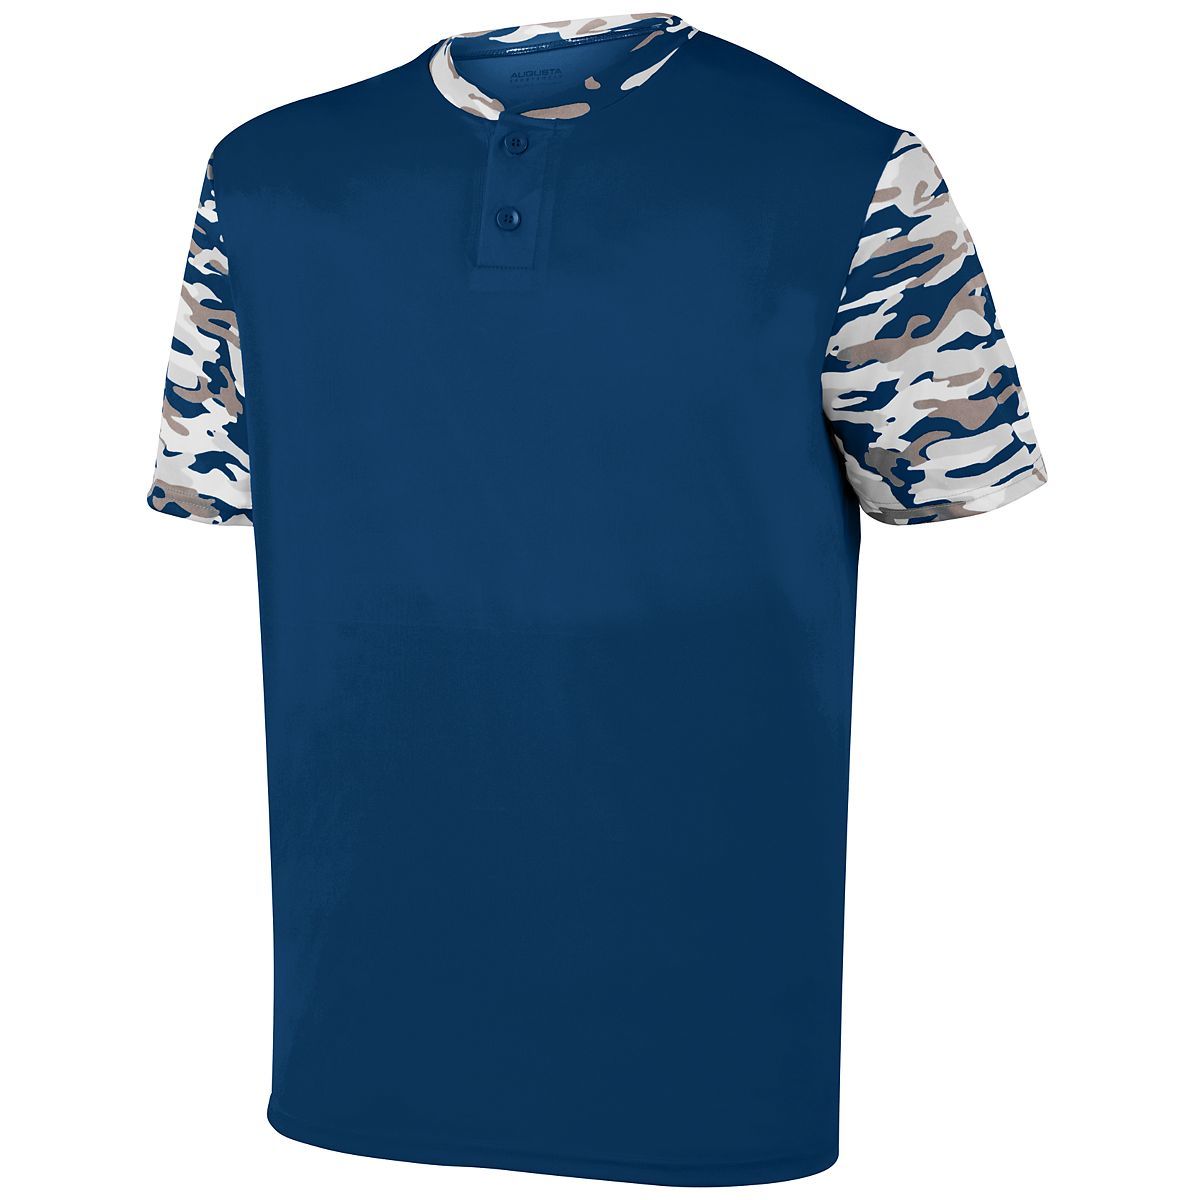 Augusta Sportswear Pop Fly Jersey in Navy/Navy Mod  -Part of the Adult, Adult-Jersey, Augusta-Products, Baseball, Shirts, All-Sports, All-Sports-1 product lines at KanaleyCreations.com